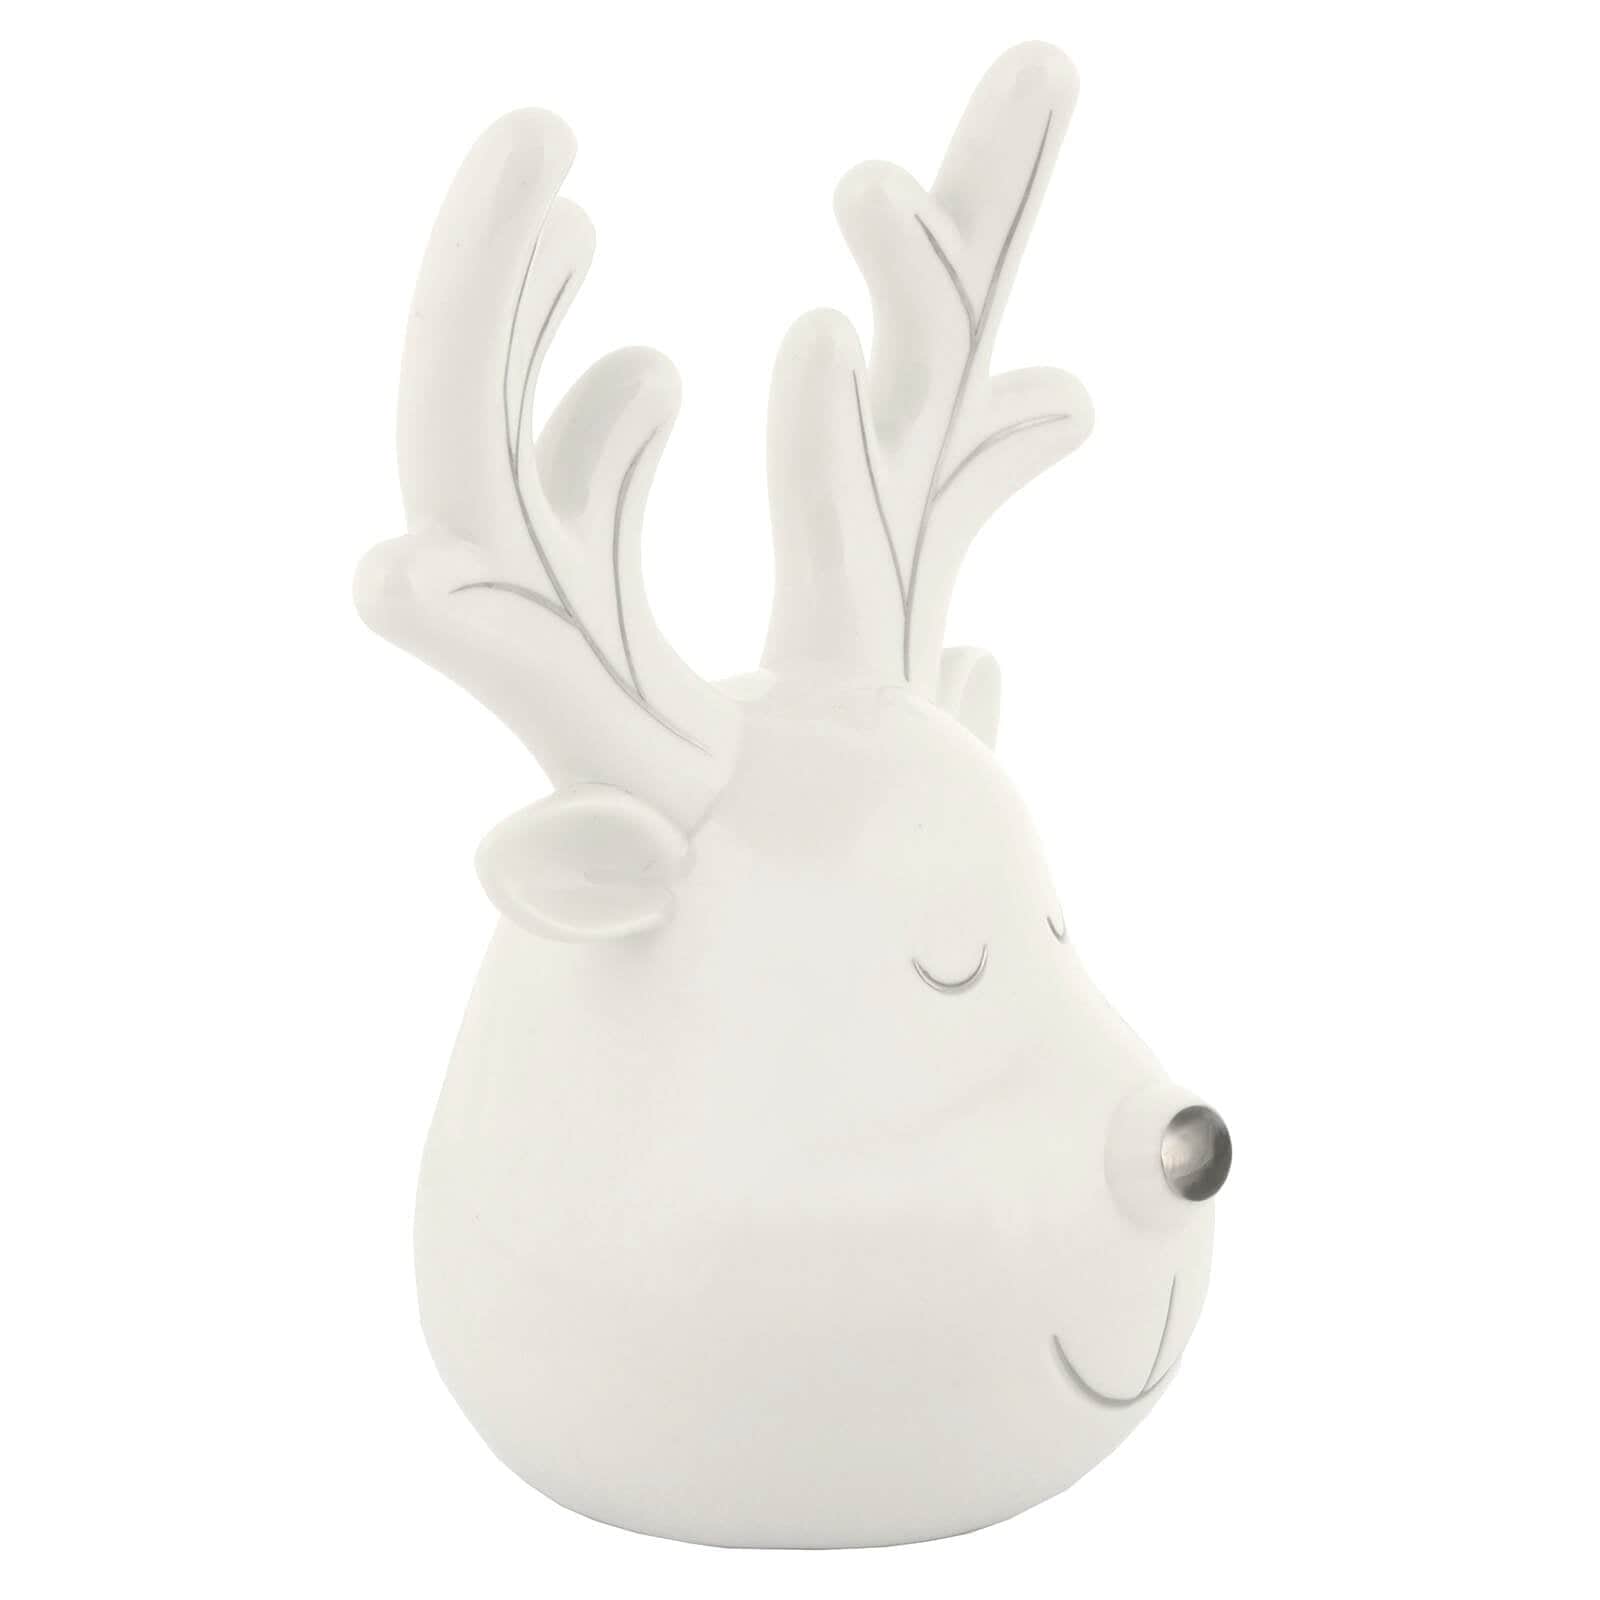 Side view of white ceramic reindeer ornament with silver detailing